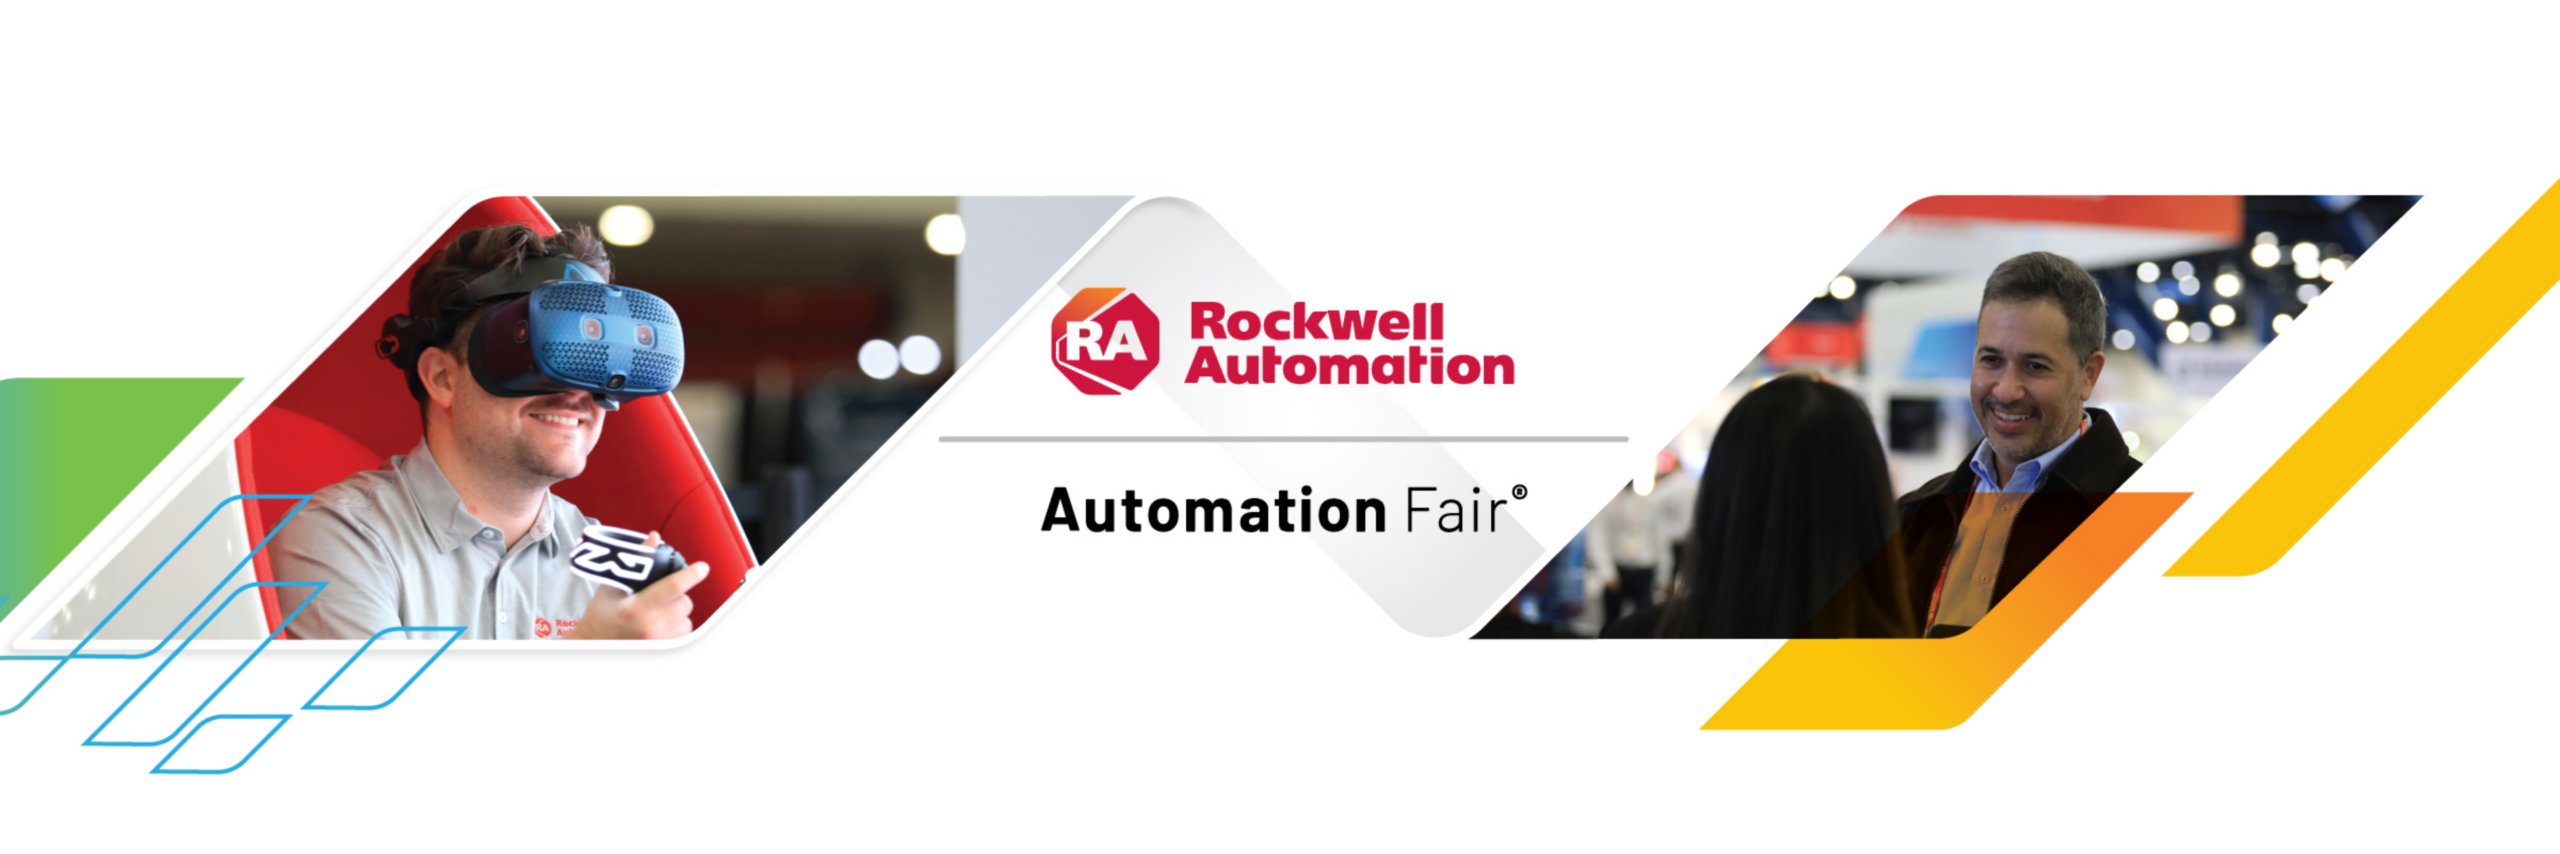 Rockwell Automation - Automation Fair logo with an image of a Rockwell Automation employee wearing AR goggles on the left and an image of a male and a female talking with the Automation Fair Expo in the background to the right. 